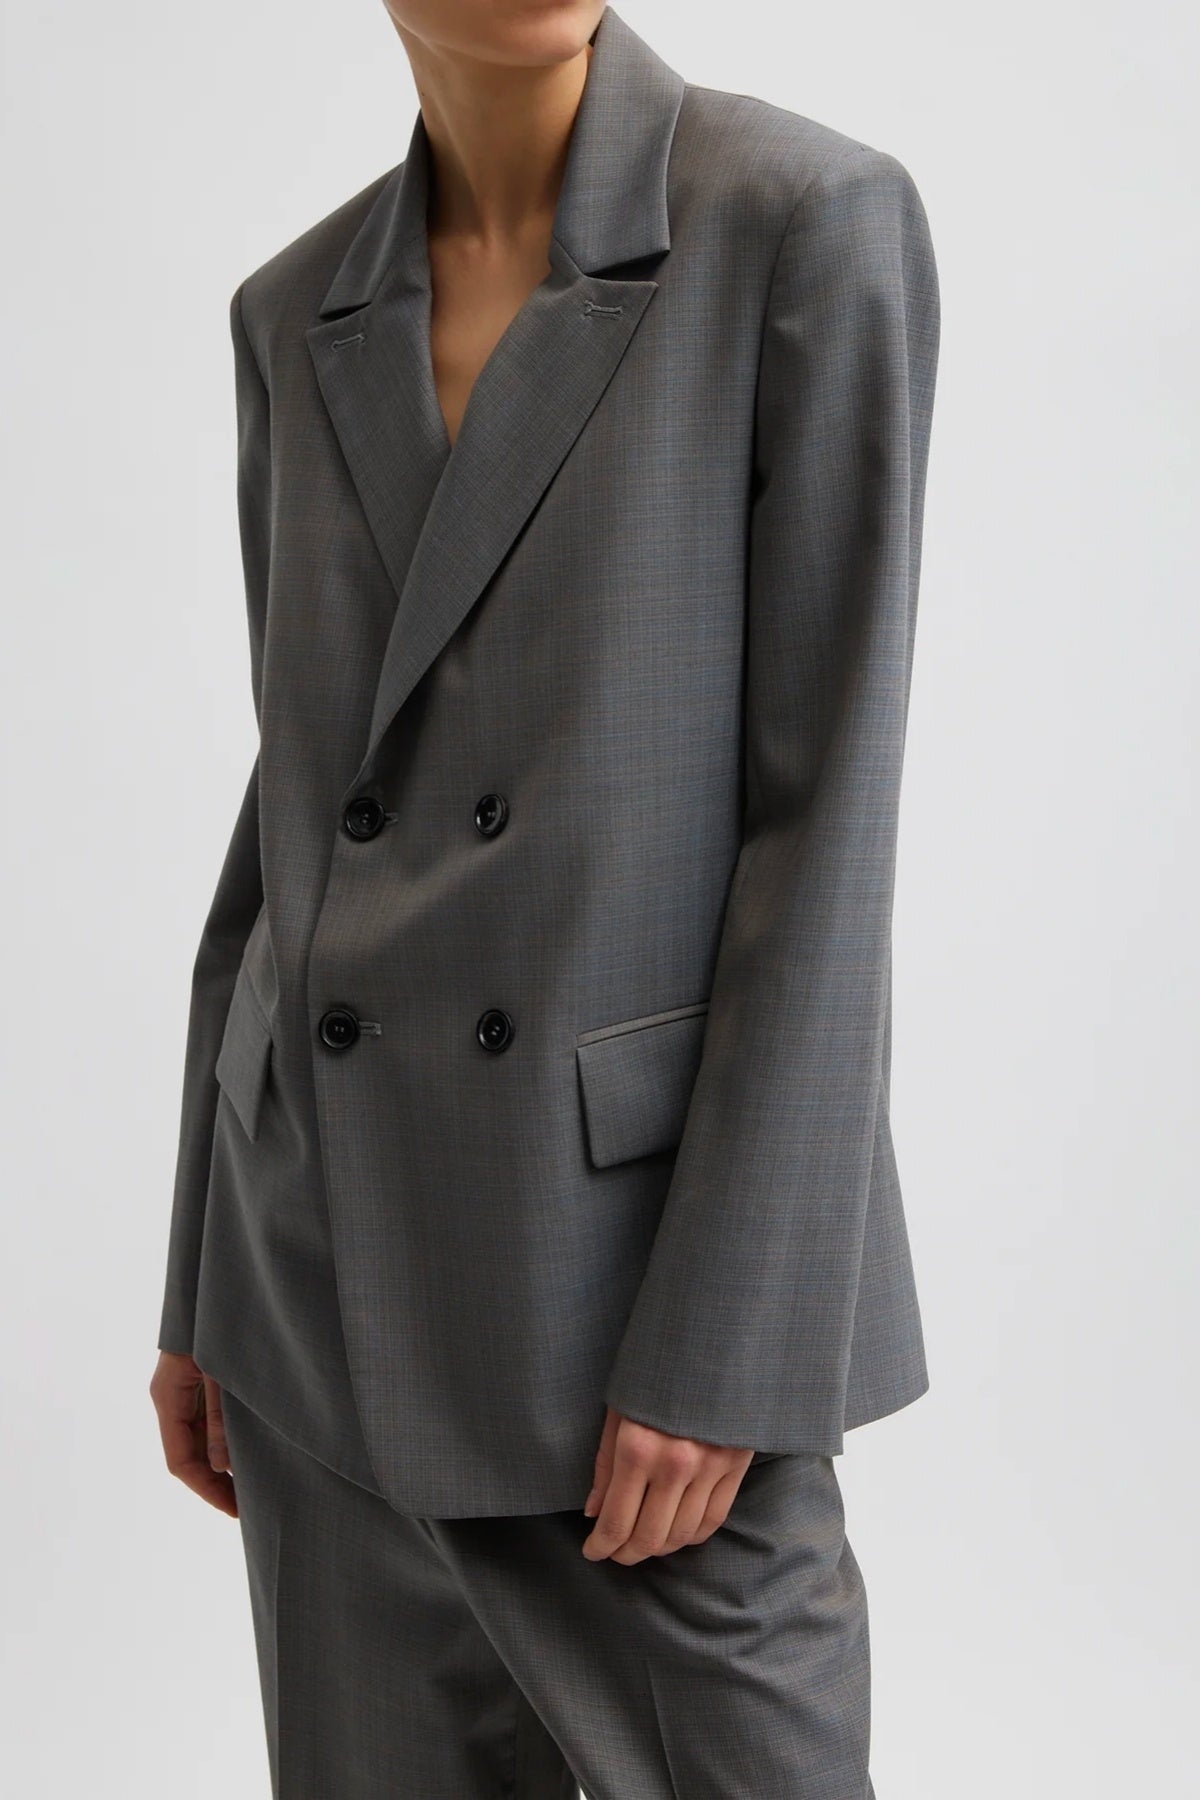 Tibi Grant Suiting Double Breasted Blazer - Grey Multi